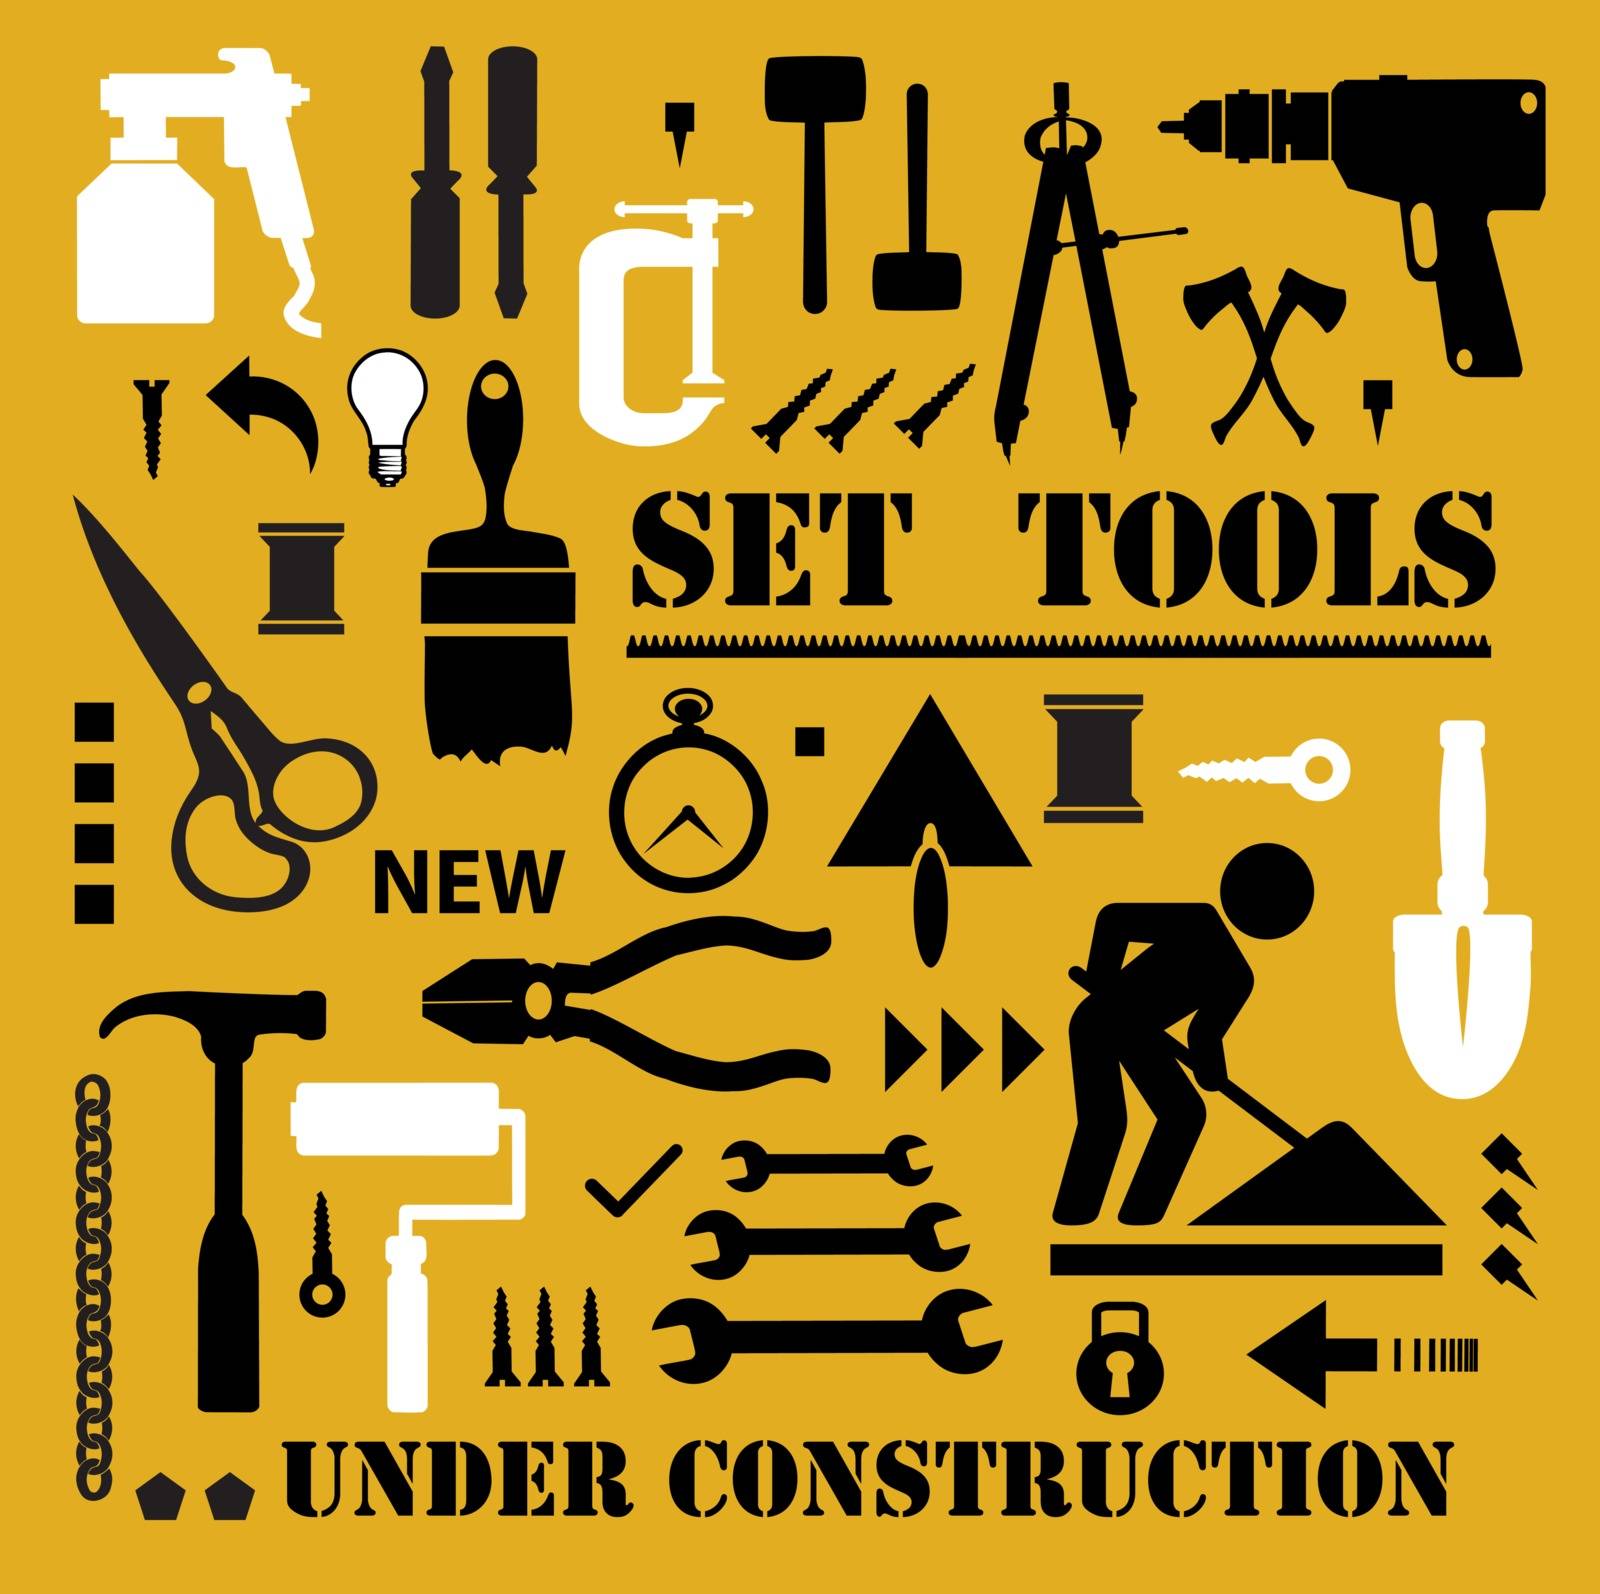 A set of tools silhouettes in black on a yellow background and black